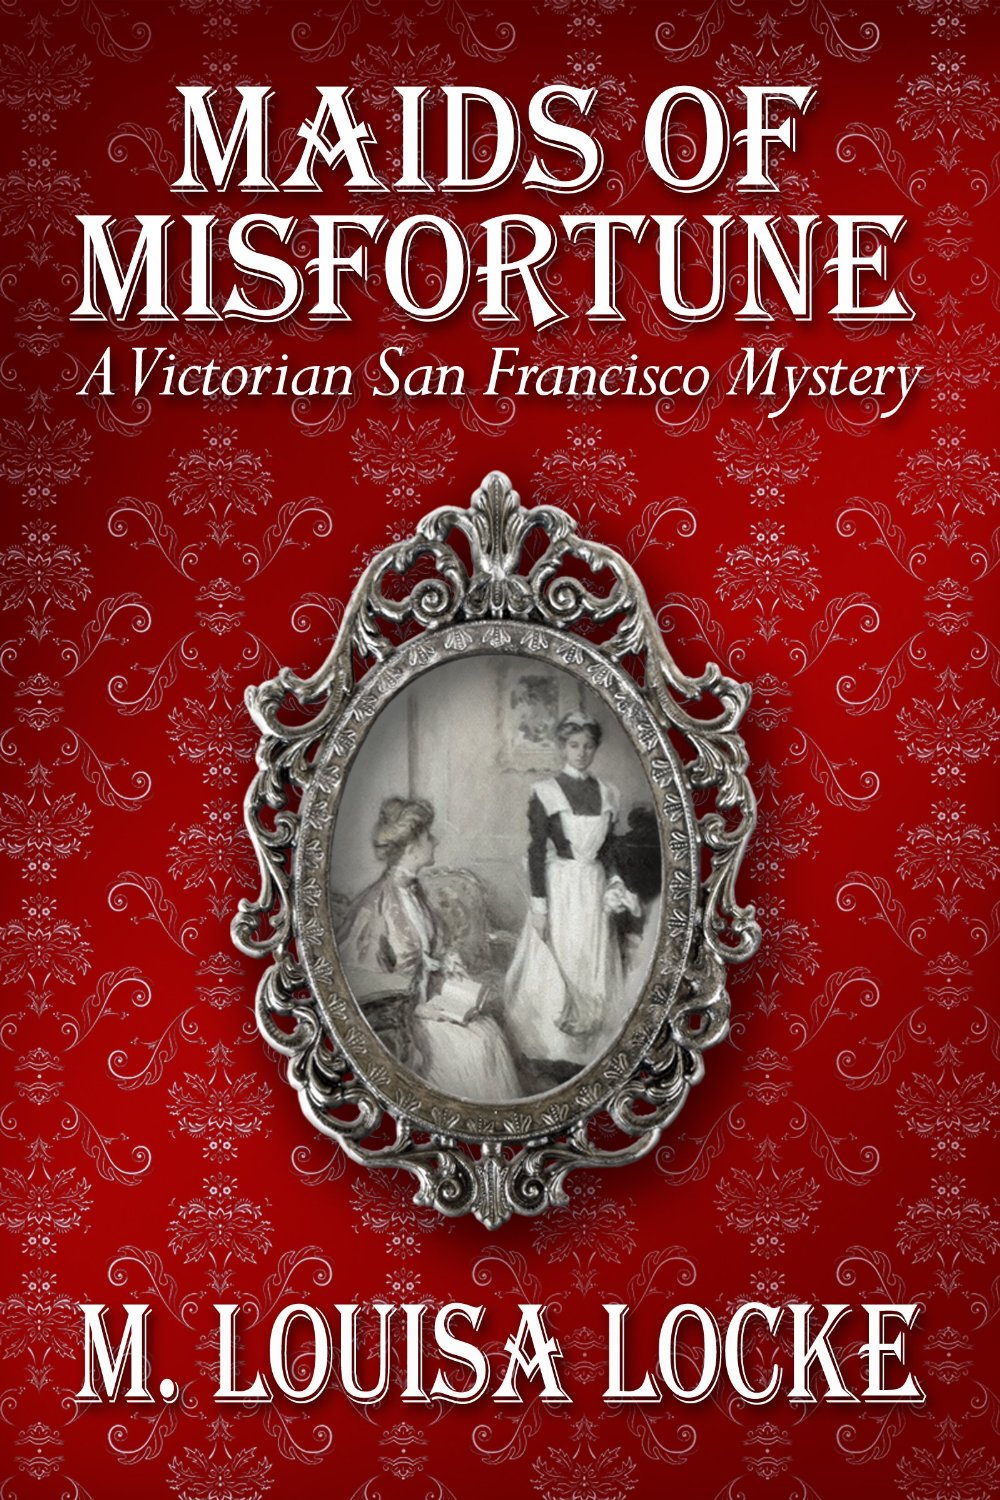 Maids of Misfortune: A Victorian San Francisco Mystery by M. Louisa Locke